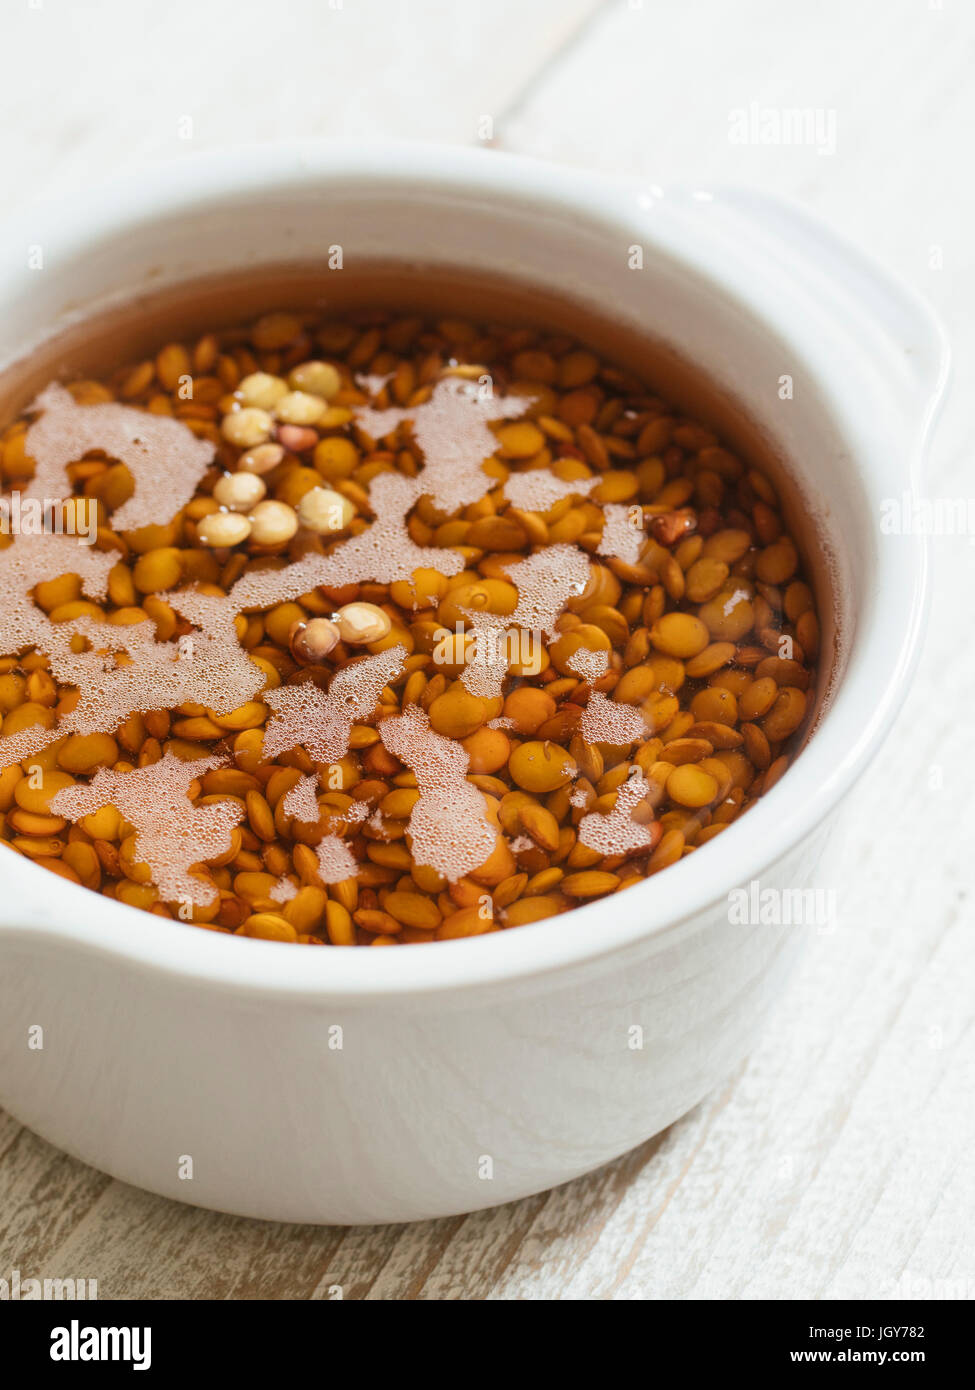 Lentils soaking in water to make them easier to digest Stock Photo